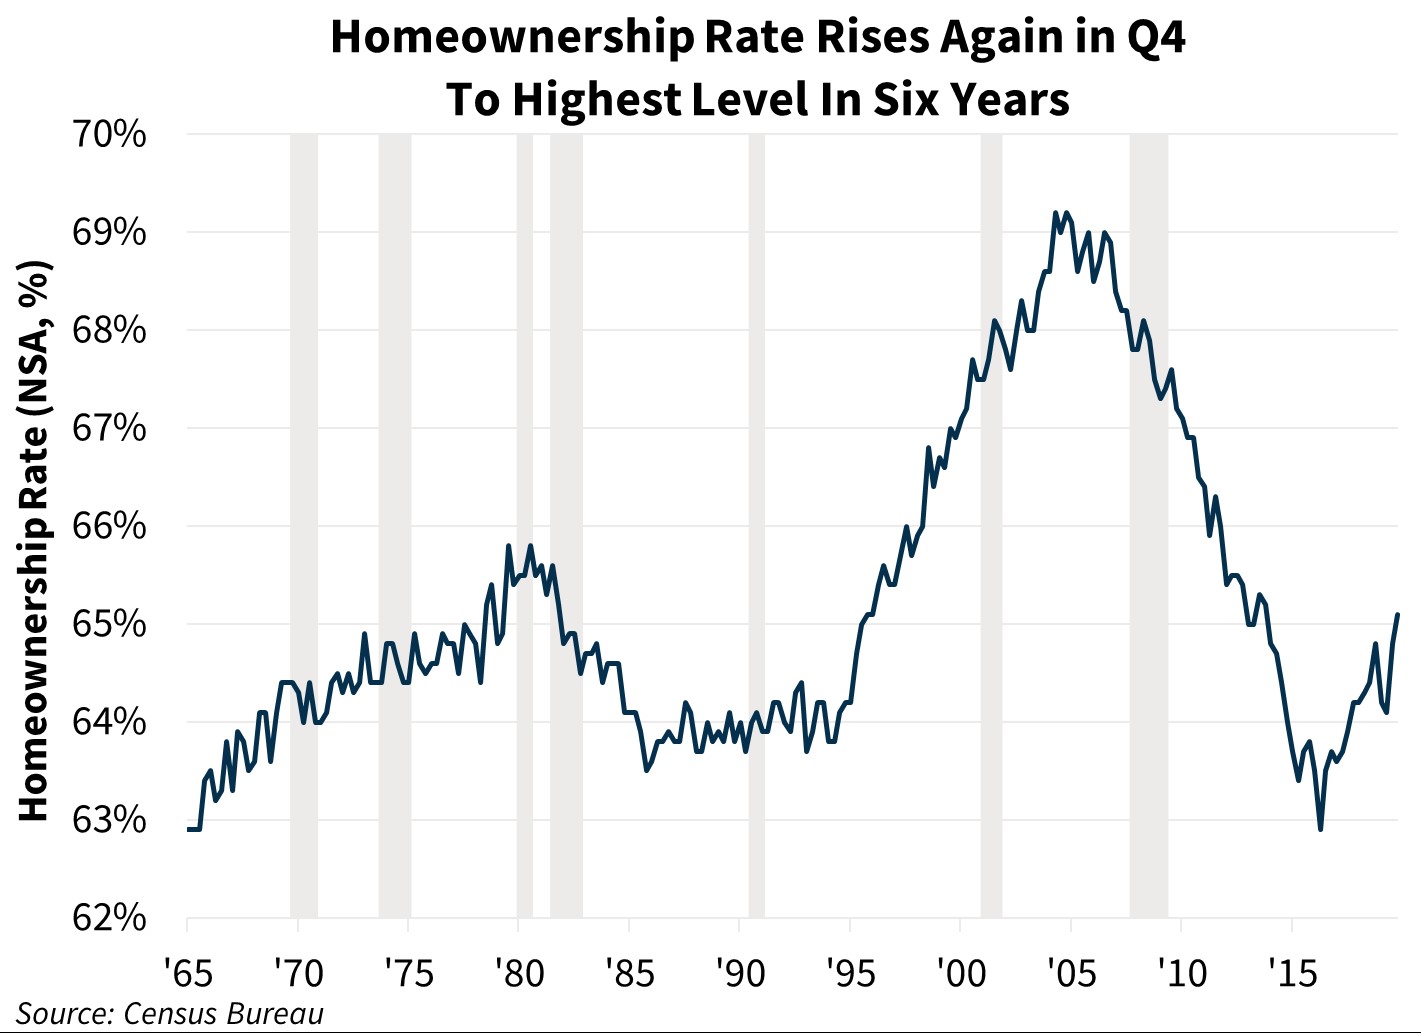 Homeownership Rate Rises Again in Q4 To Highest Level in Six Years